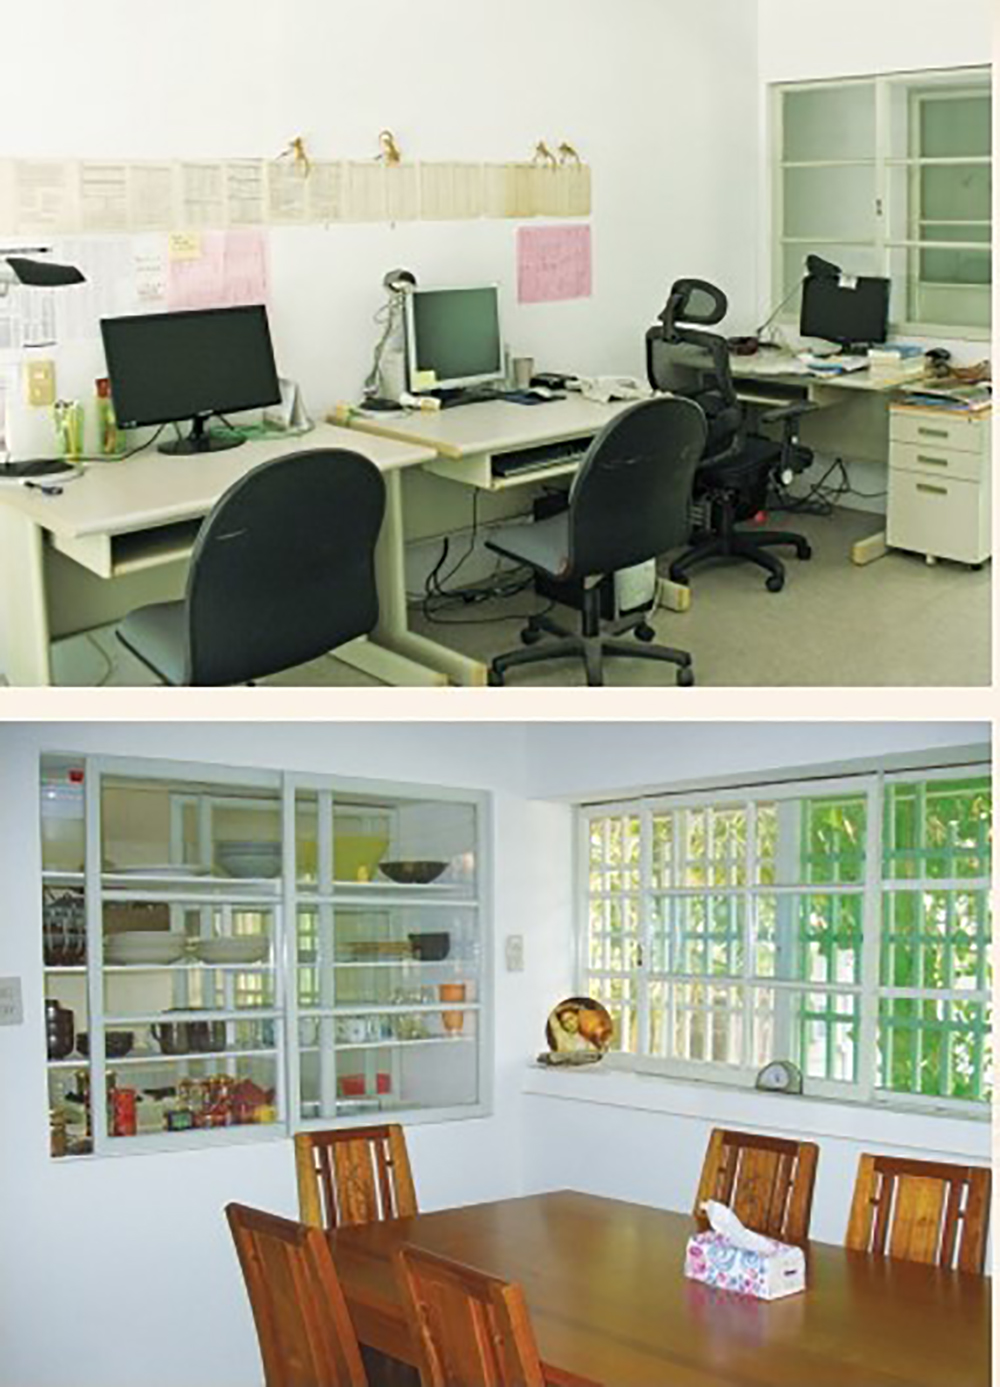 Research room and restaurant in the Japanese dormitory of the International Center for Tainan Area Humanities and Social Sciences Research